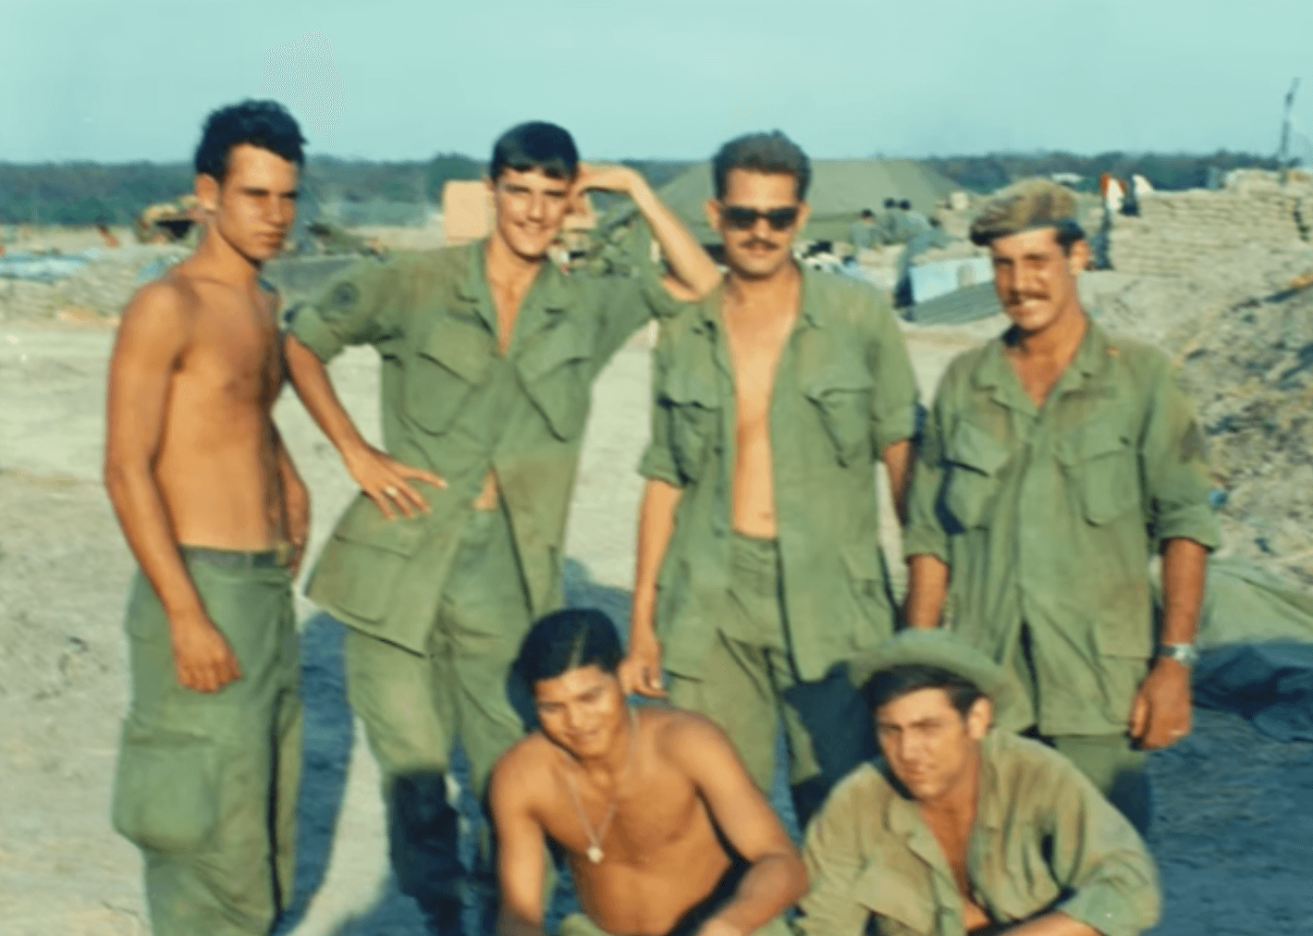 Group of 6 US soldiers posing for a photo. Some are shirtless, some have their shirts unbuttoned.